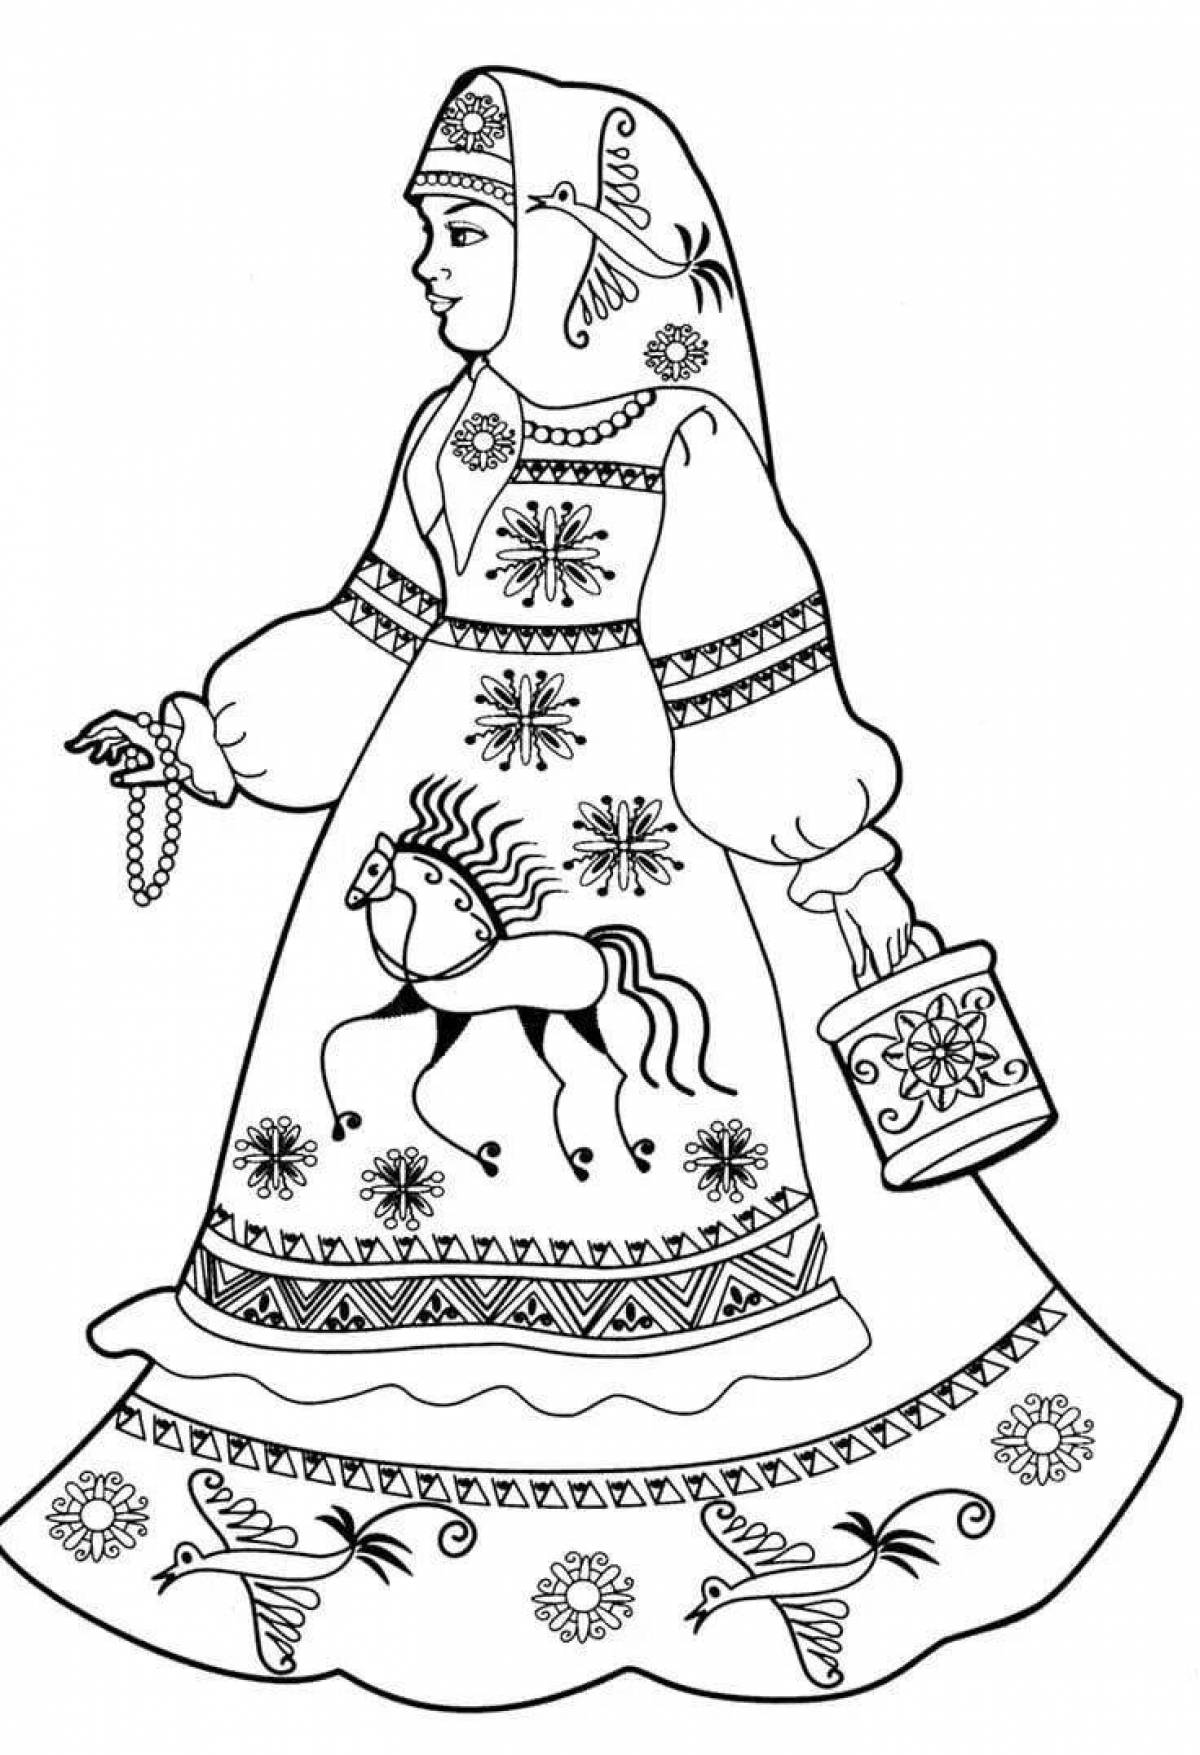 Coloring page gentle Russian costume